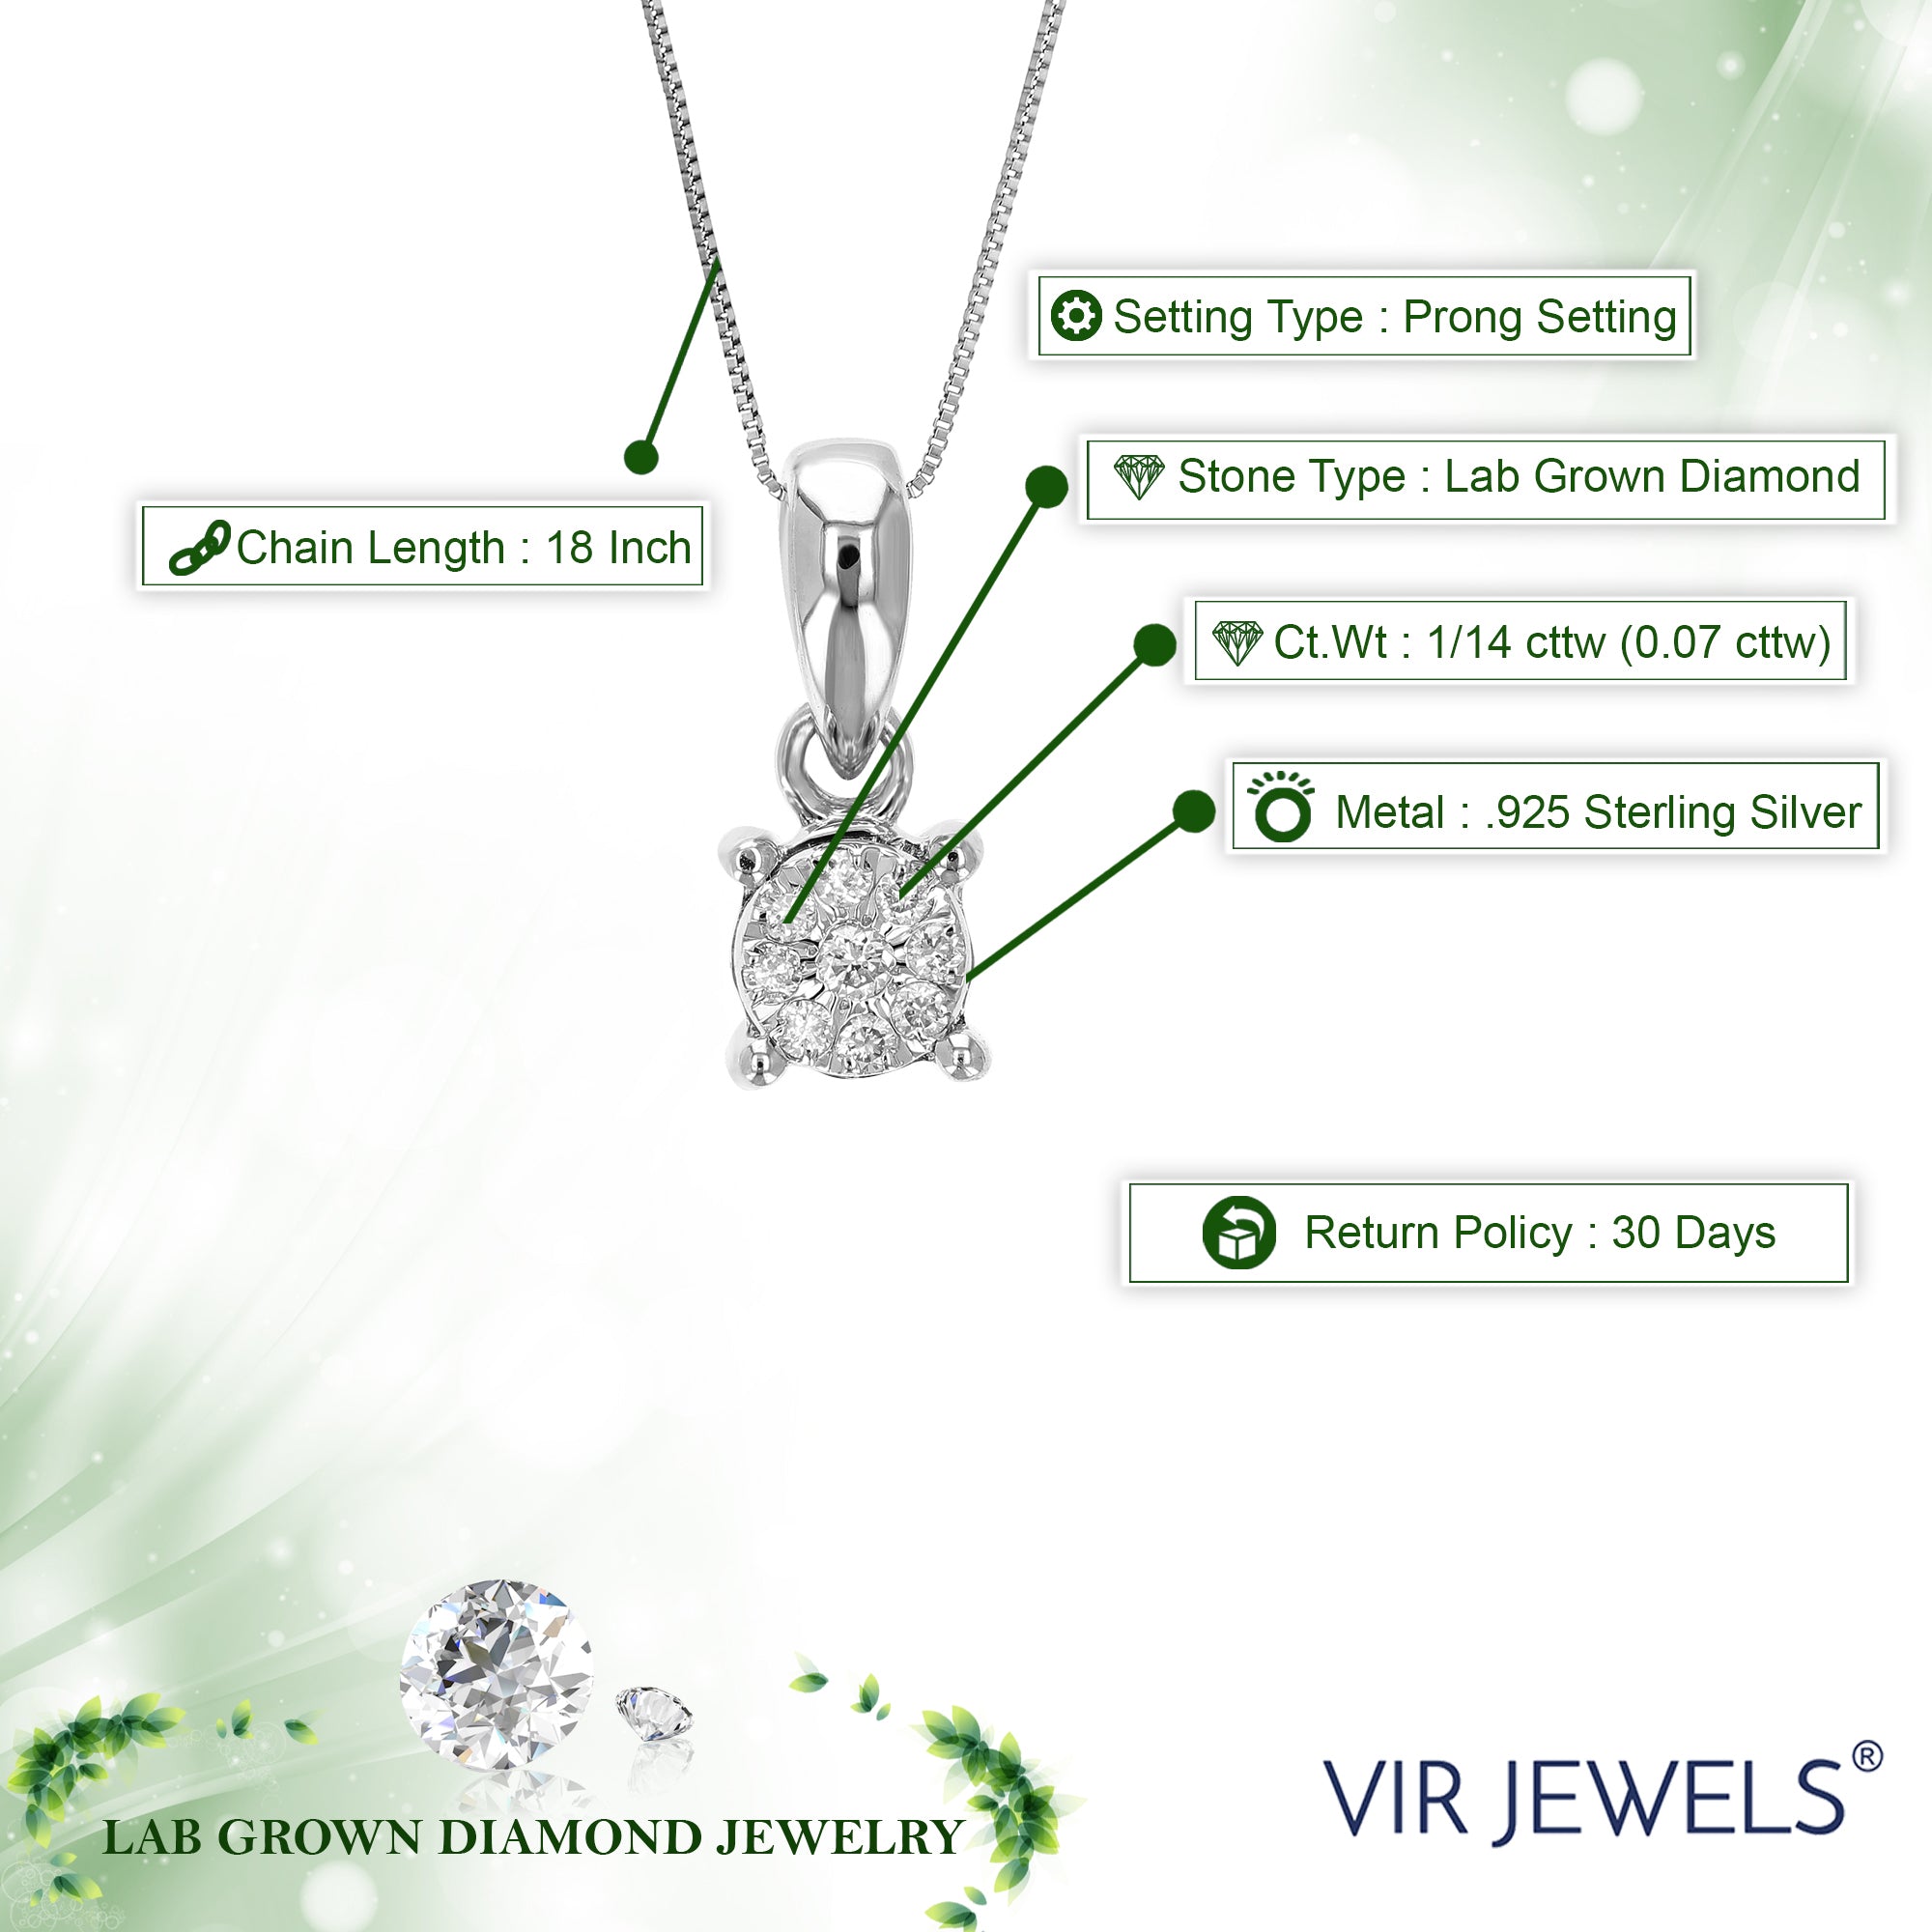 1/14 cttw Lab Grown Diamond Fashion Pendant Necklace .925 Sterling Silver 1/5 Inch with 18 Inch Chain, Size 1/3 Inch